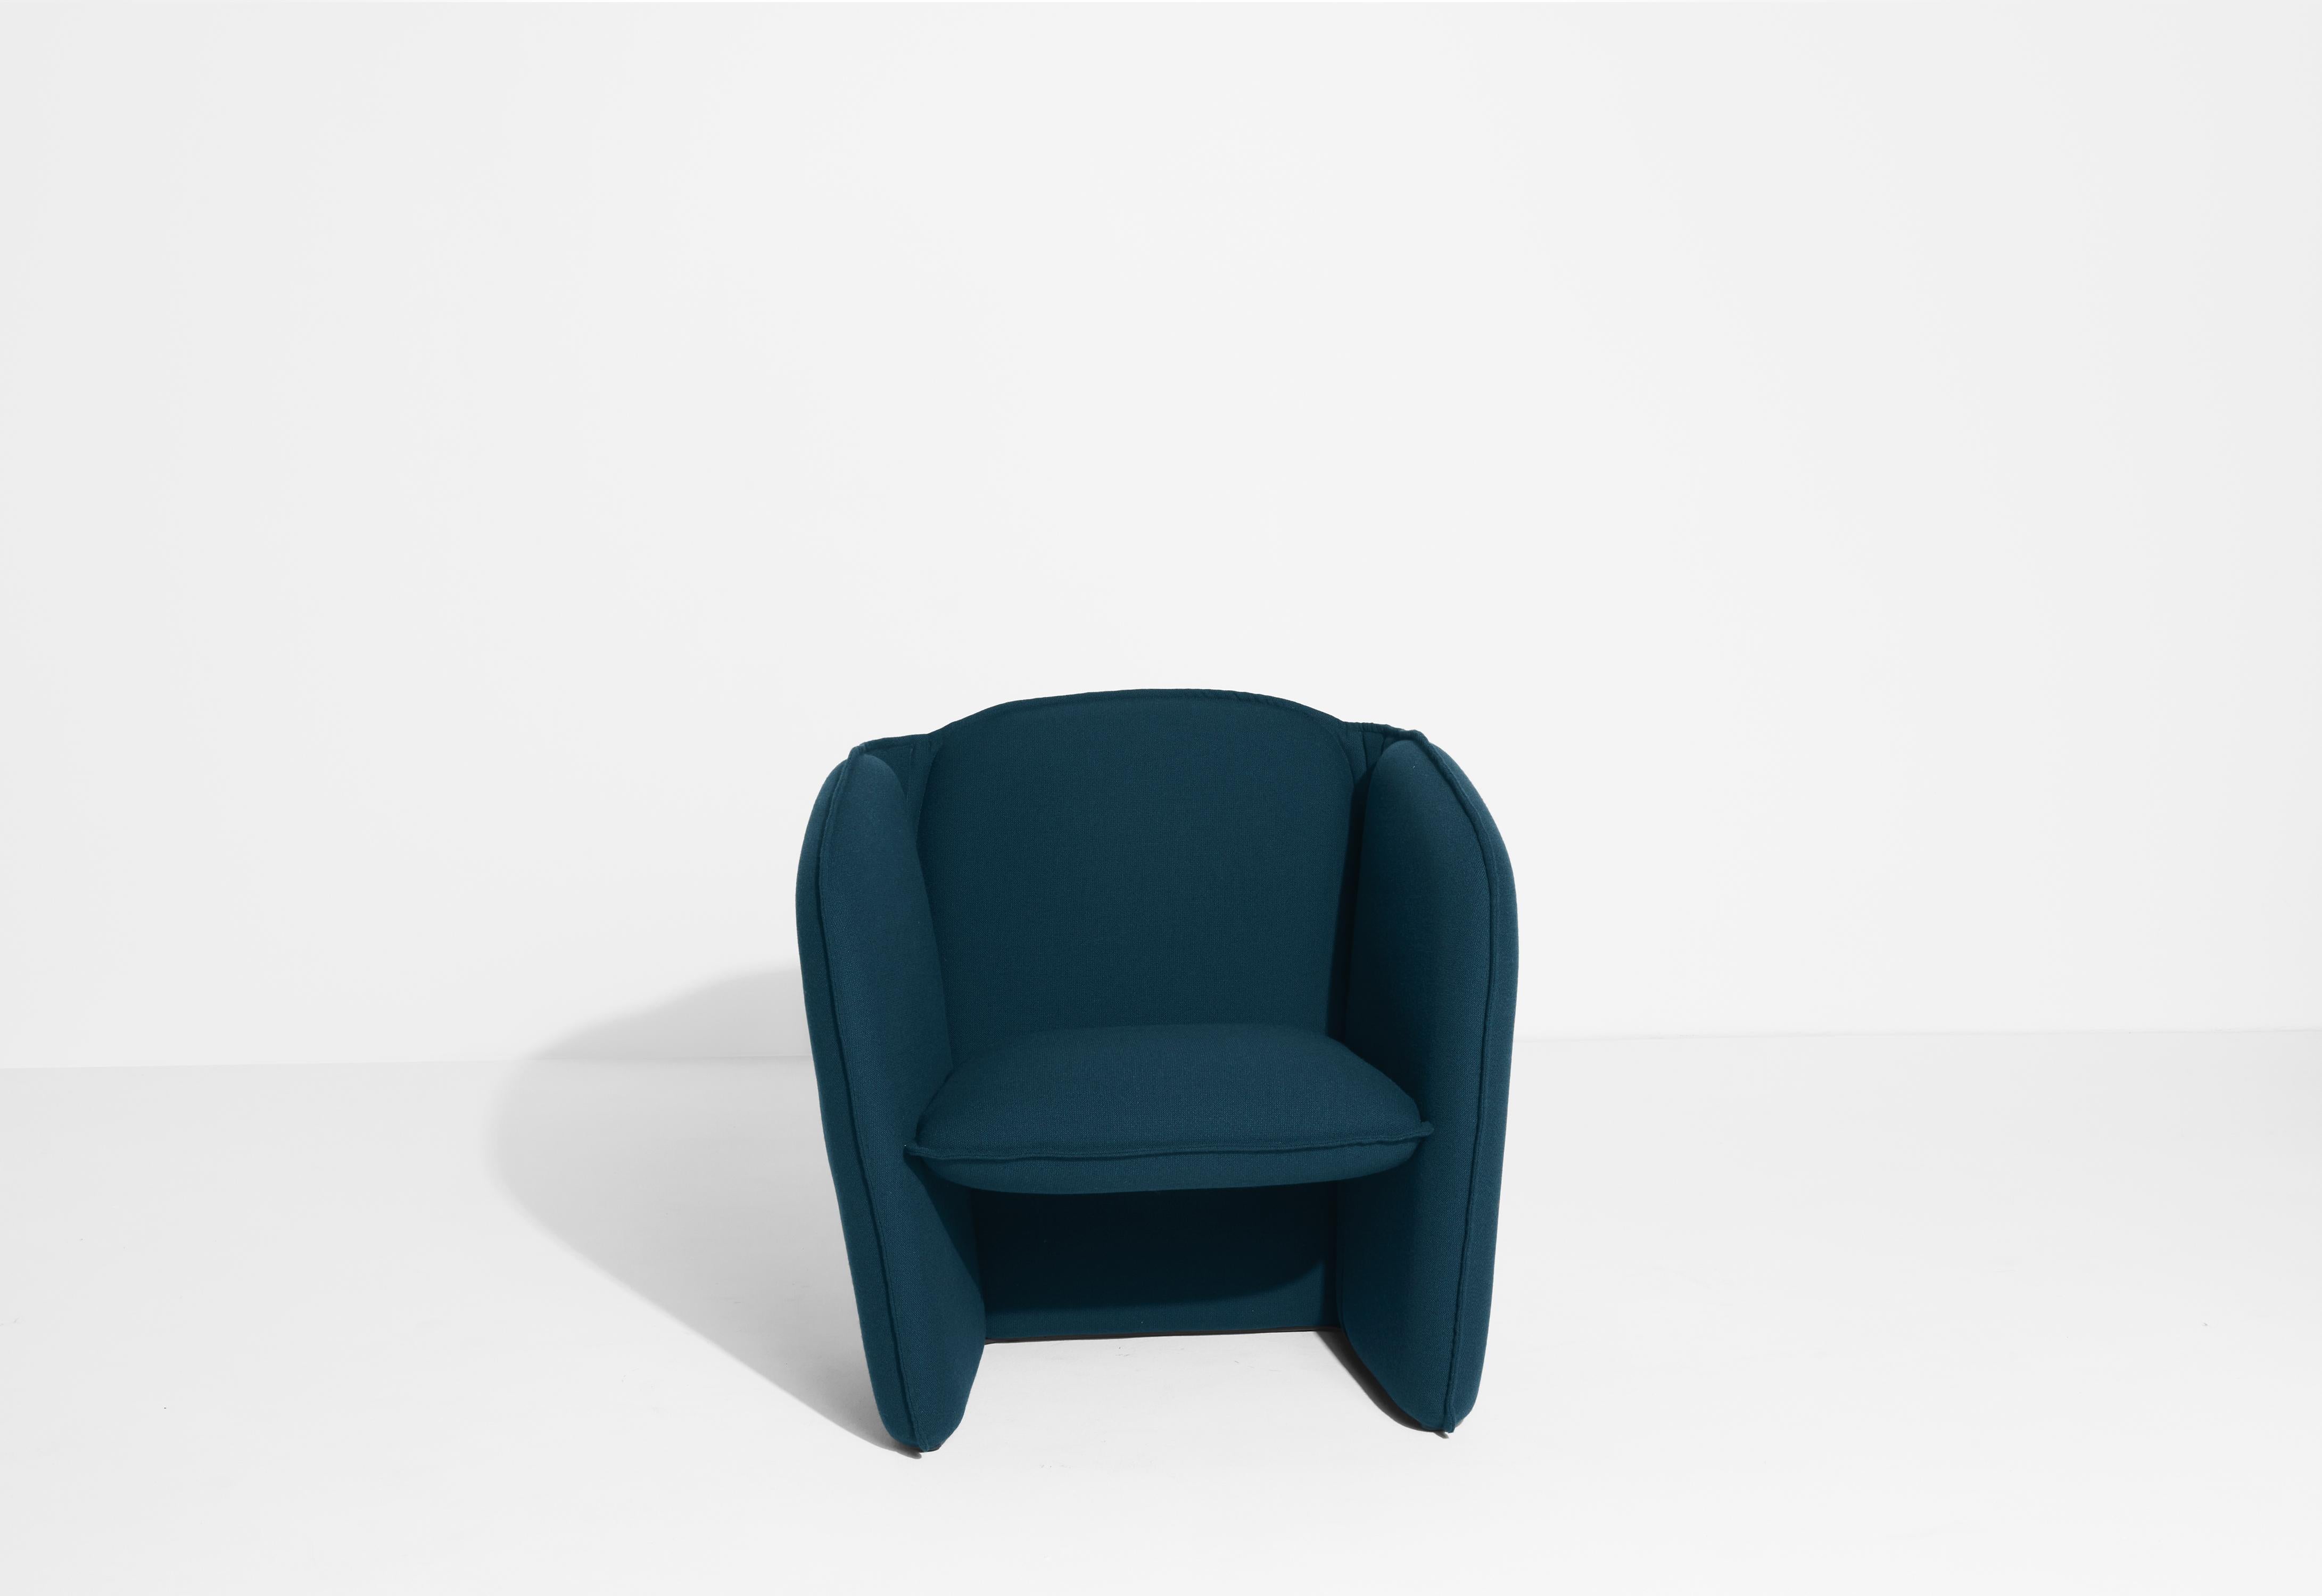 Petite Friture Lily Armchair in Navy Blue by Färg & Blanche, 2022 In New Condition For Sale In Brooklyn, NY